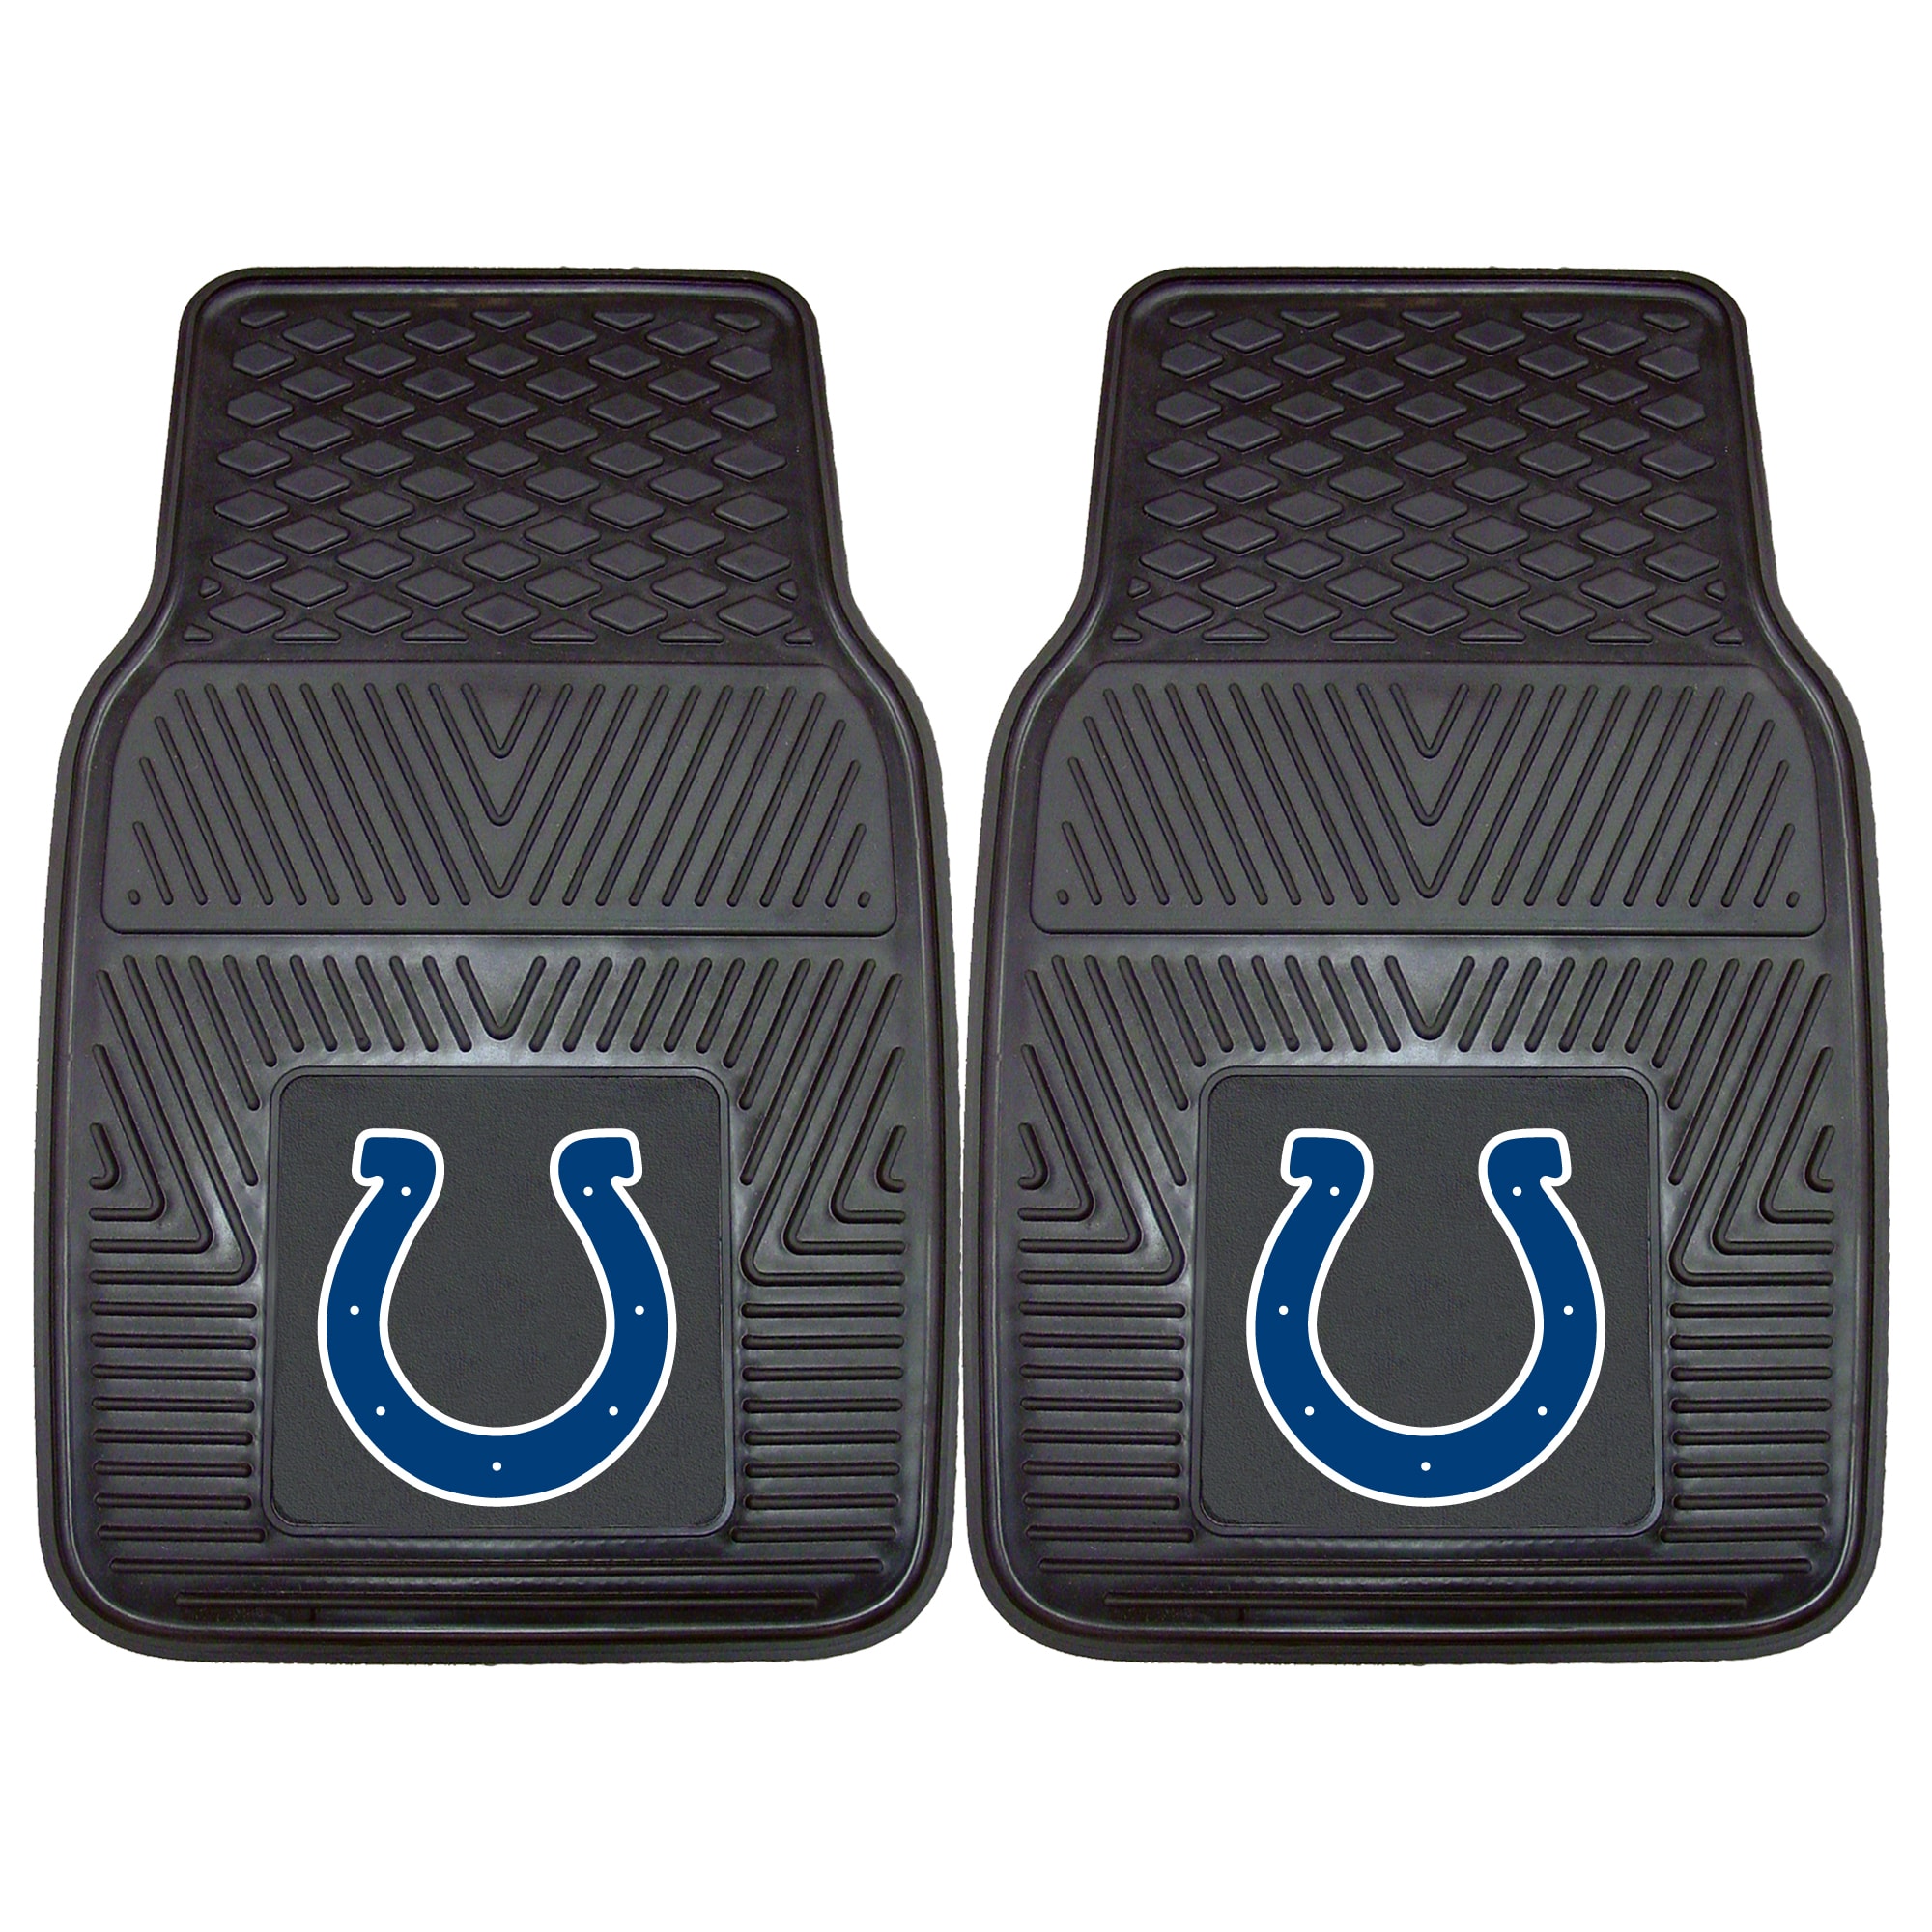 Fanmats Indianapolis Colts 2 piece Vinyl Car Mats (100 percent vinylDimensions 27 inches high x 18 inches wideType of car Universal)